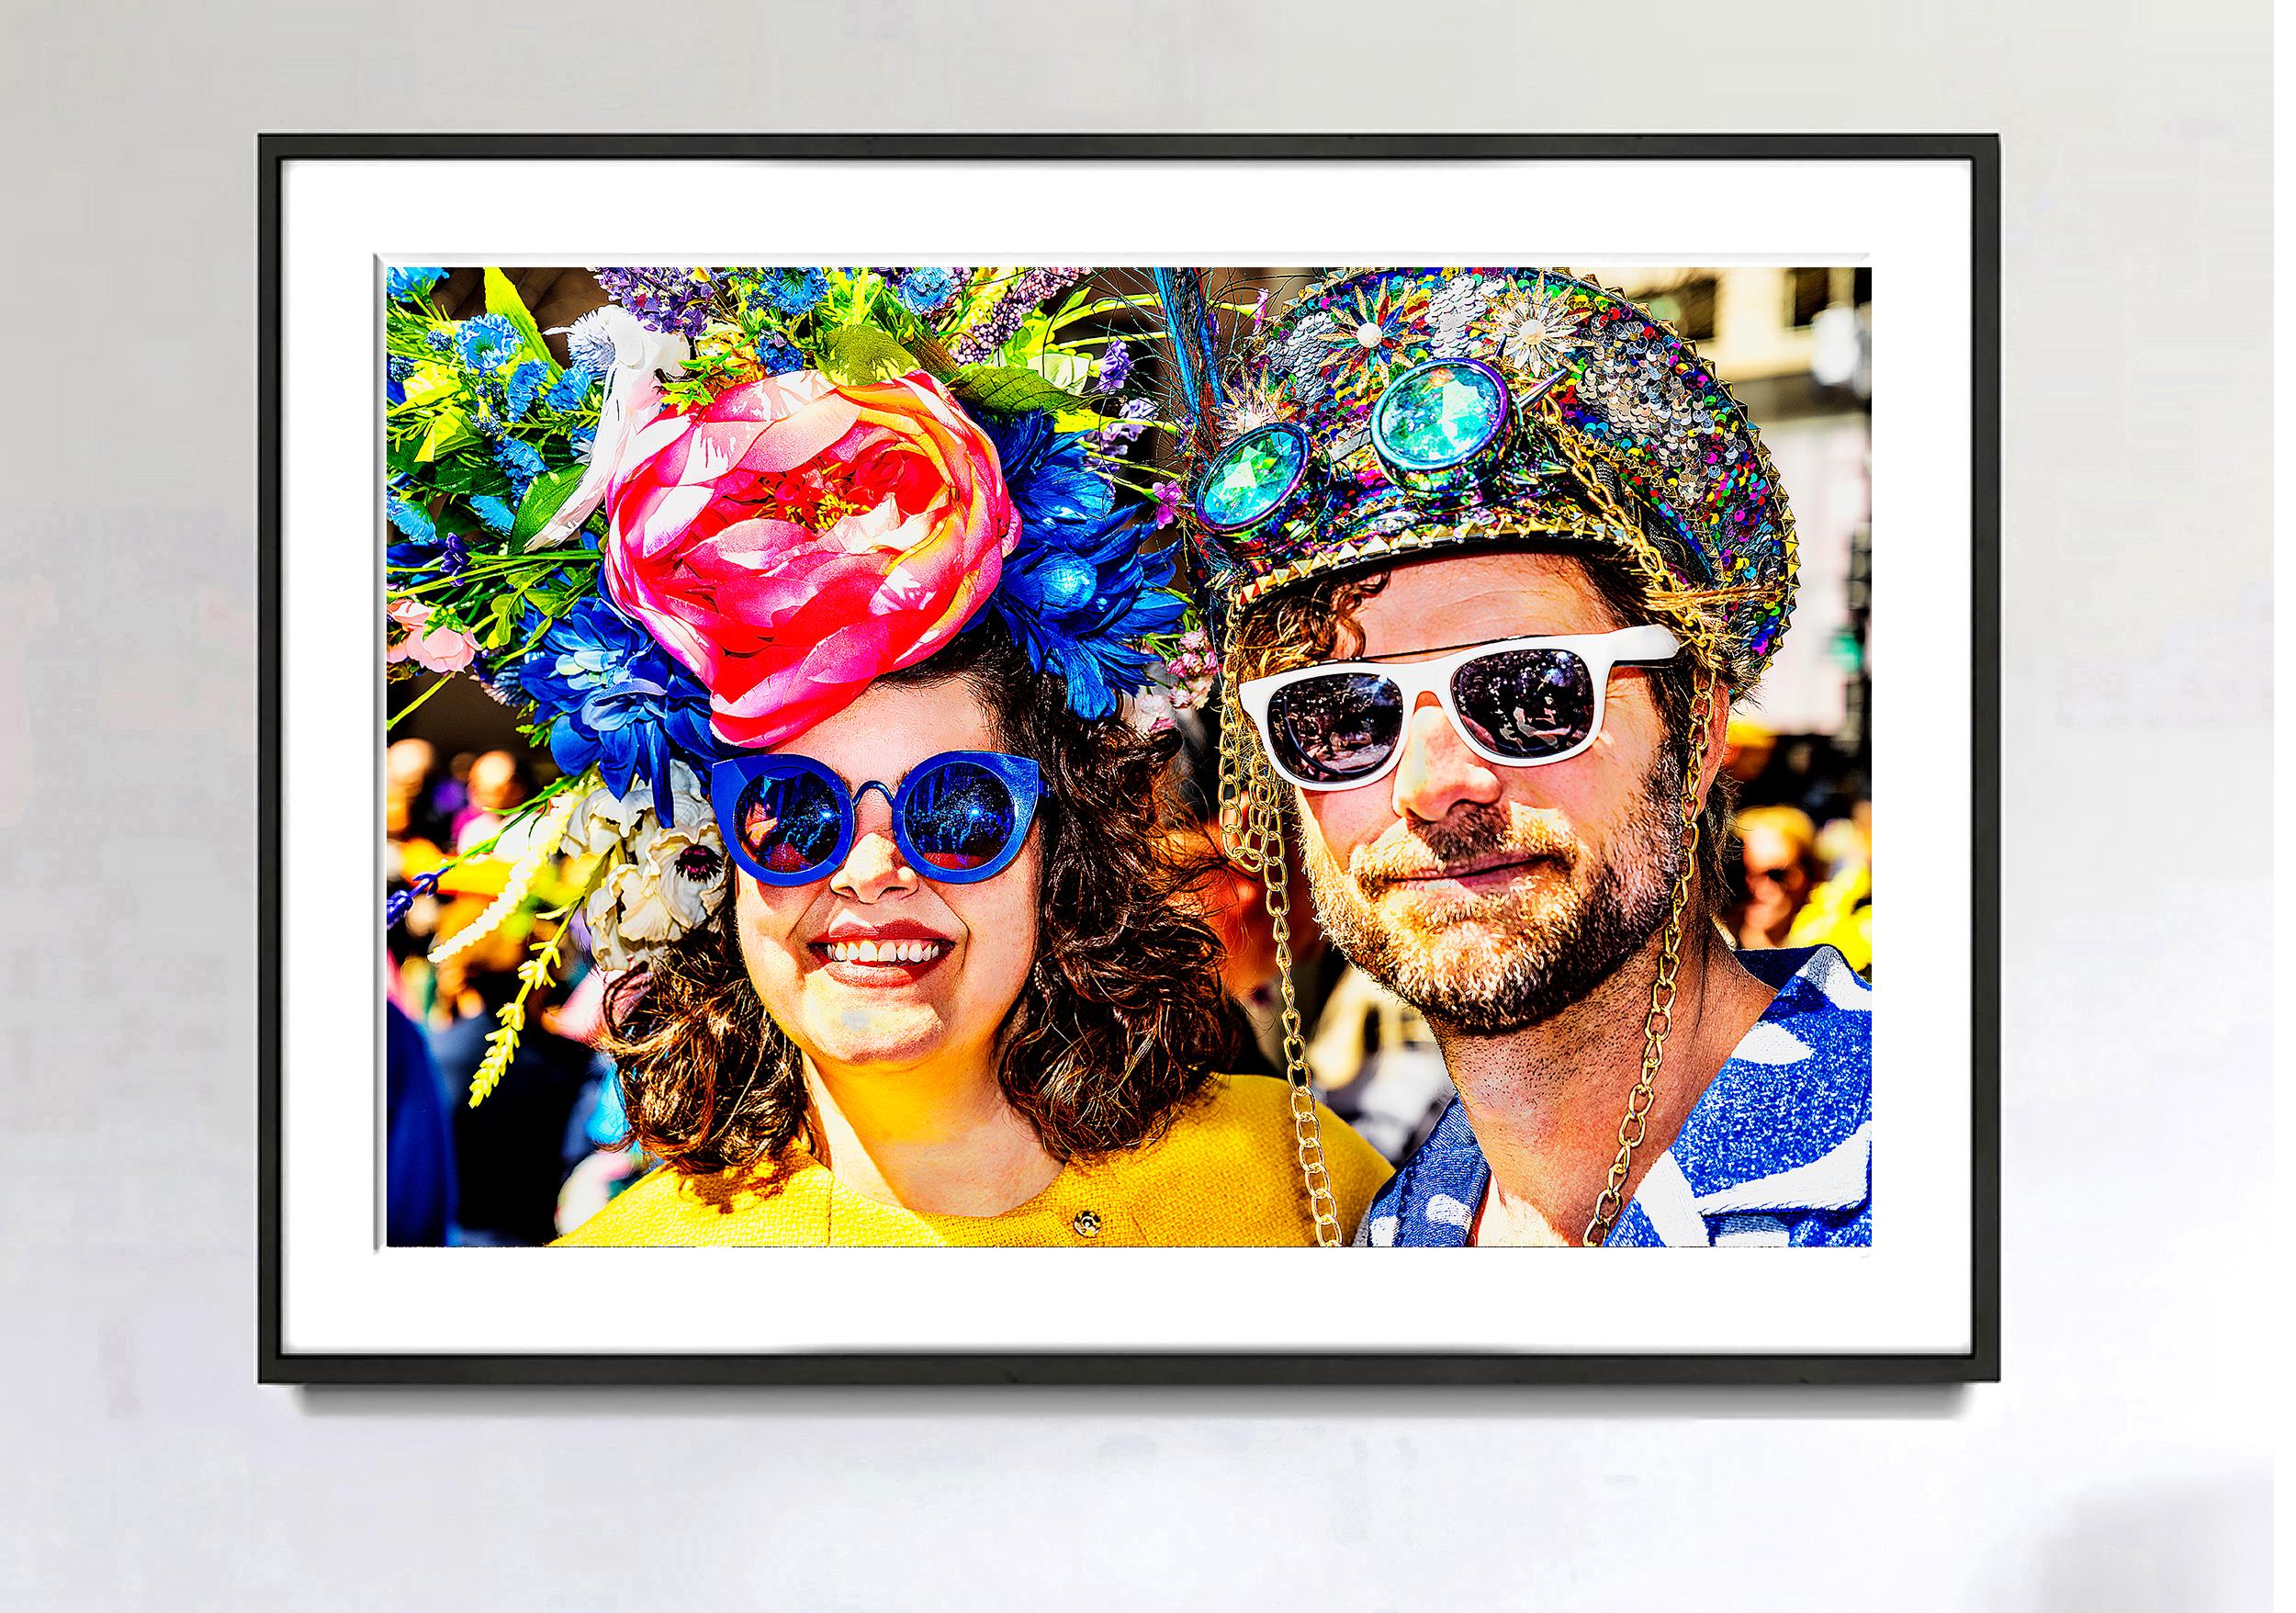 Two participants at  Fifth Avenue's Easter Parade flaunt their artistic Millinery.
Veteran street photographer Mitchell Funk captured this dramatic and hyper-colorful double portrait that is as abstract as it's representational. 
Signed, dated lower